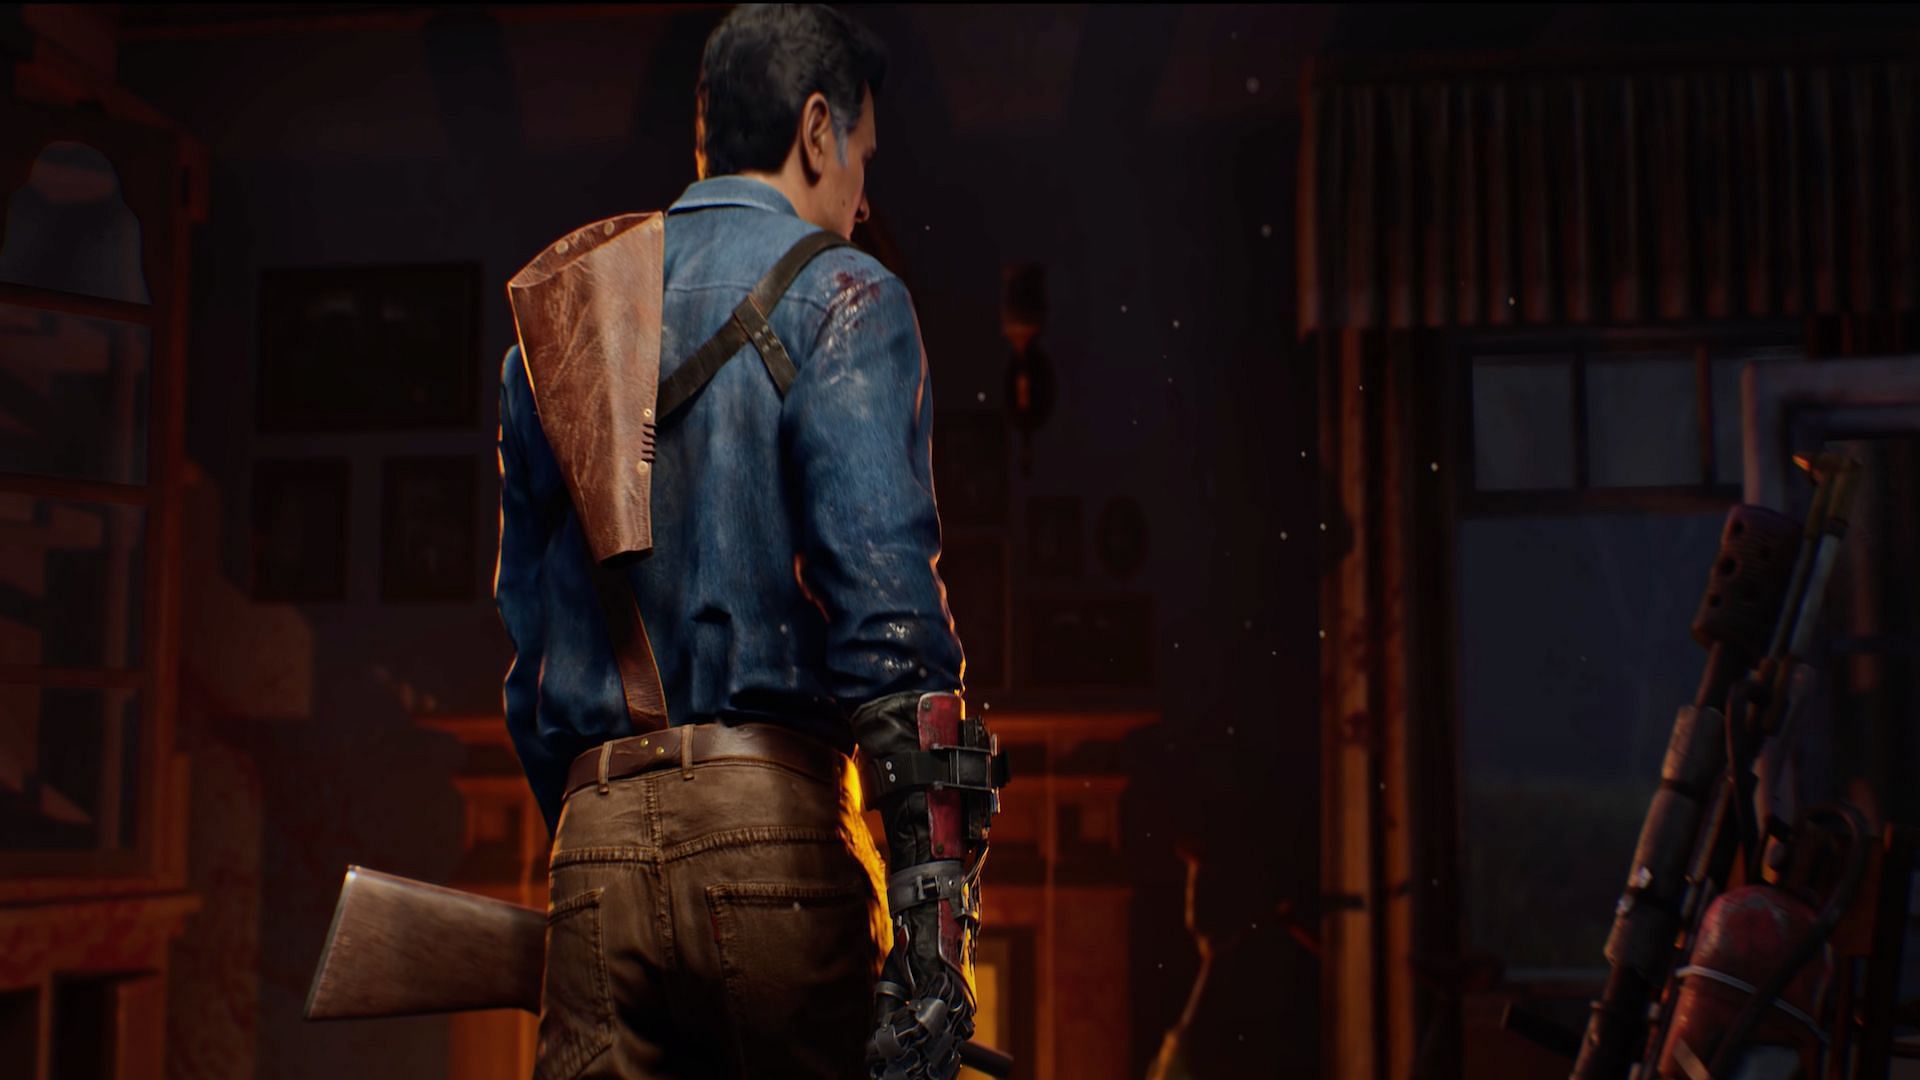 Evil Dead: The Game players can win as a Survivor with these tips (Image via Saber Interactive)